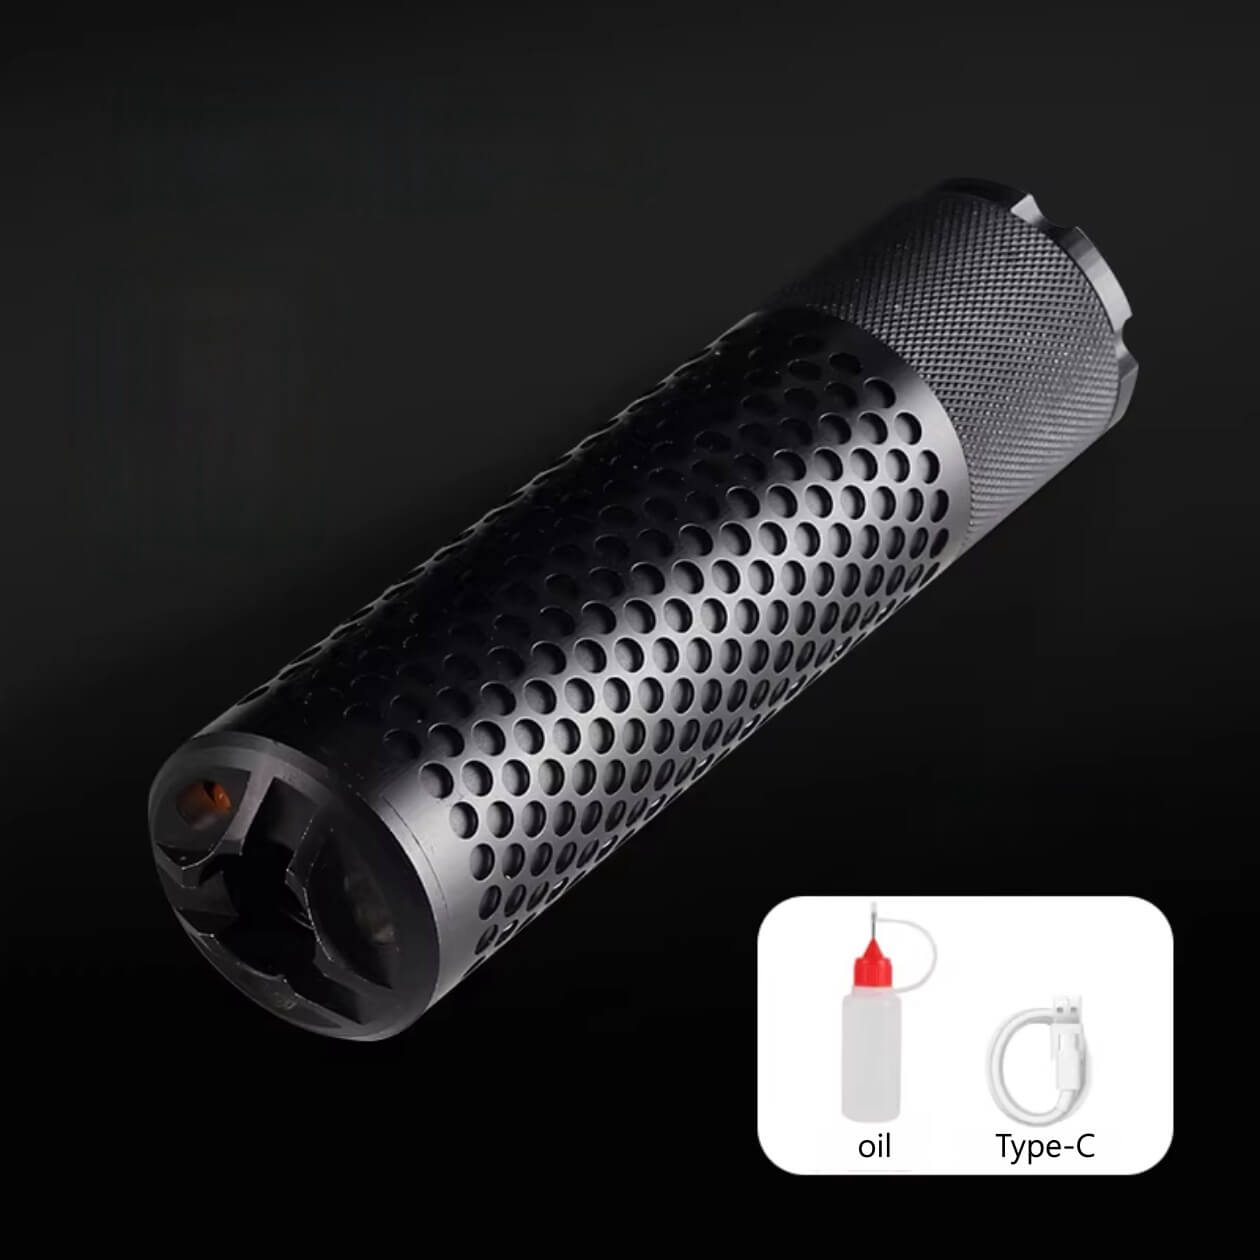 New Smoke Wolf Silencer For Both Gel blaster&Airsoft With 14mm Thread LKCJ